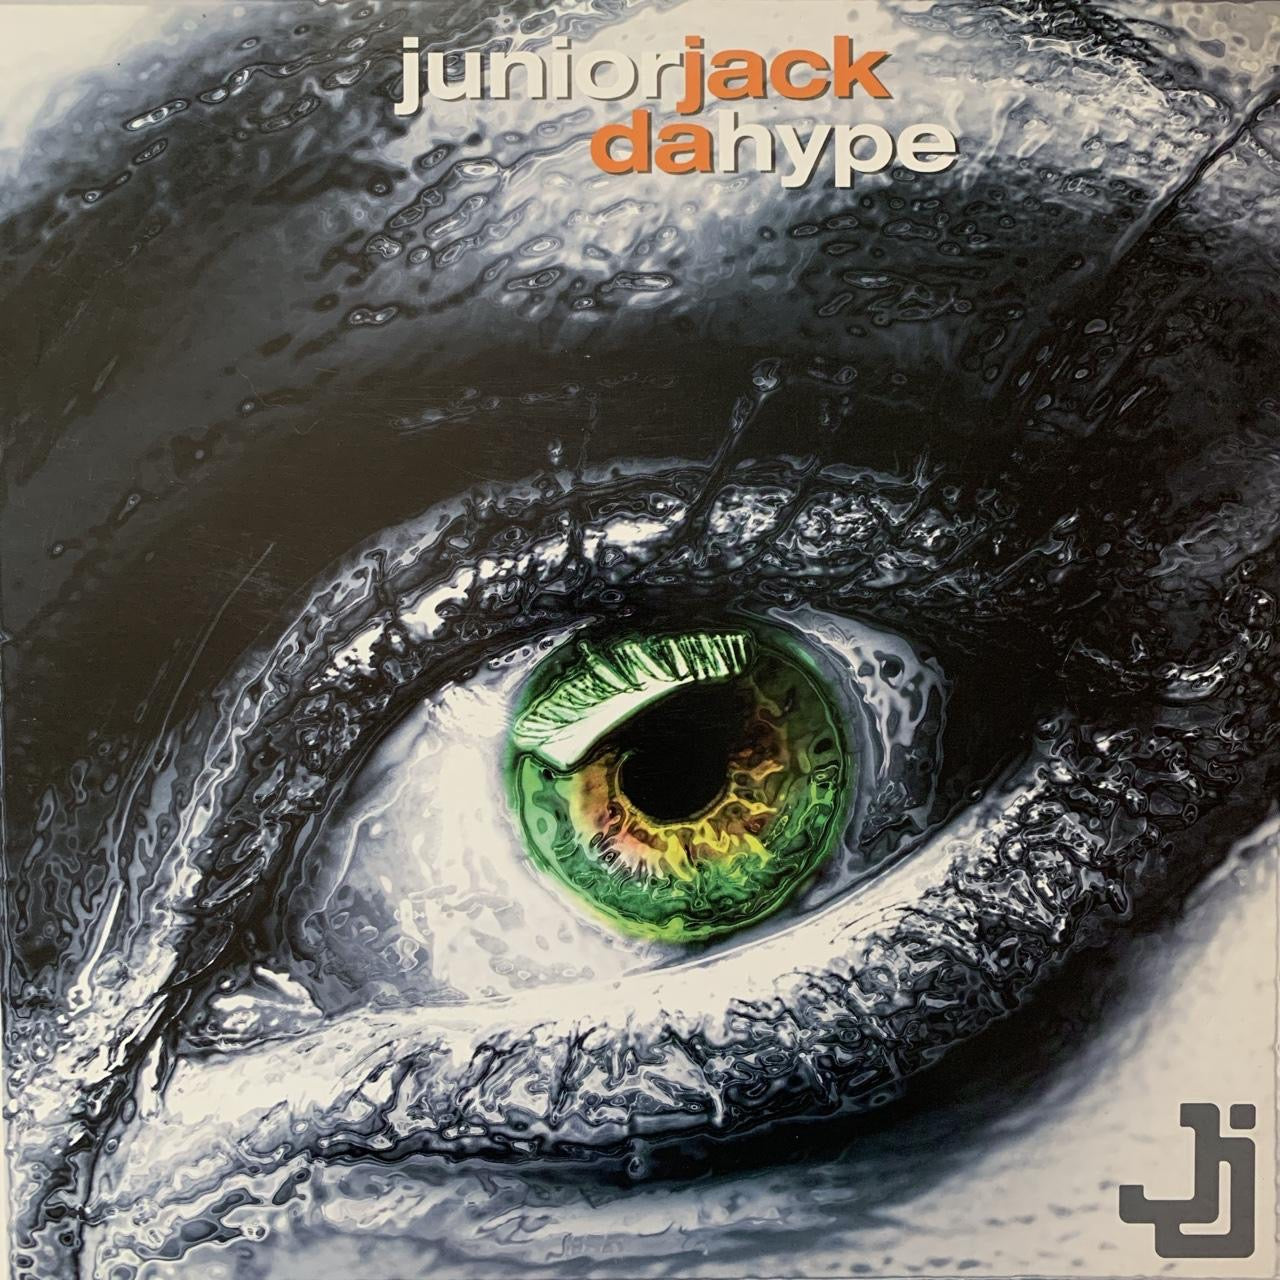 Junior Jack “Da Hype” 2 Version 12inch Vinyl Single Track Listing In Photos House Music Banger on Defected Records